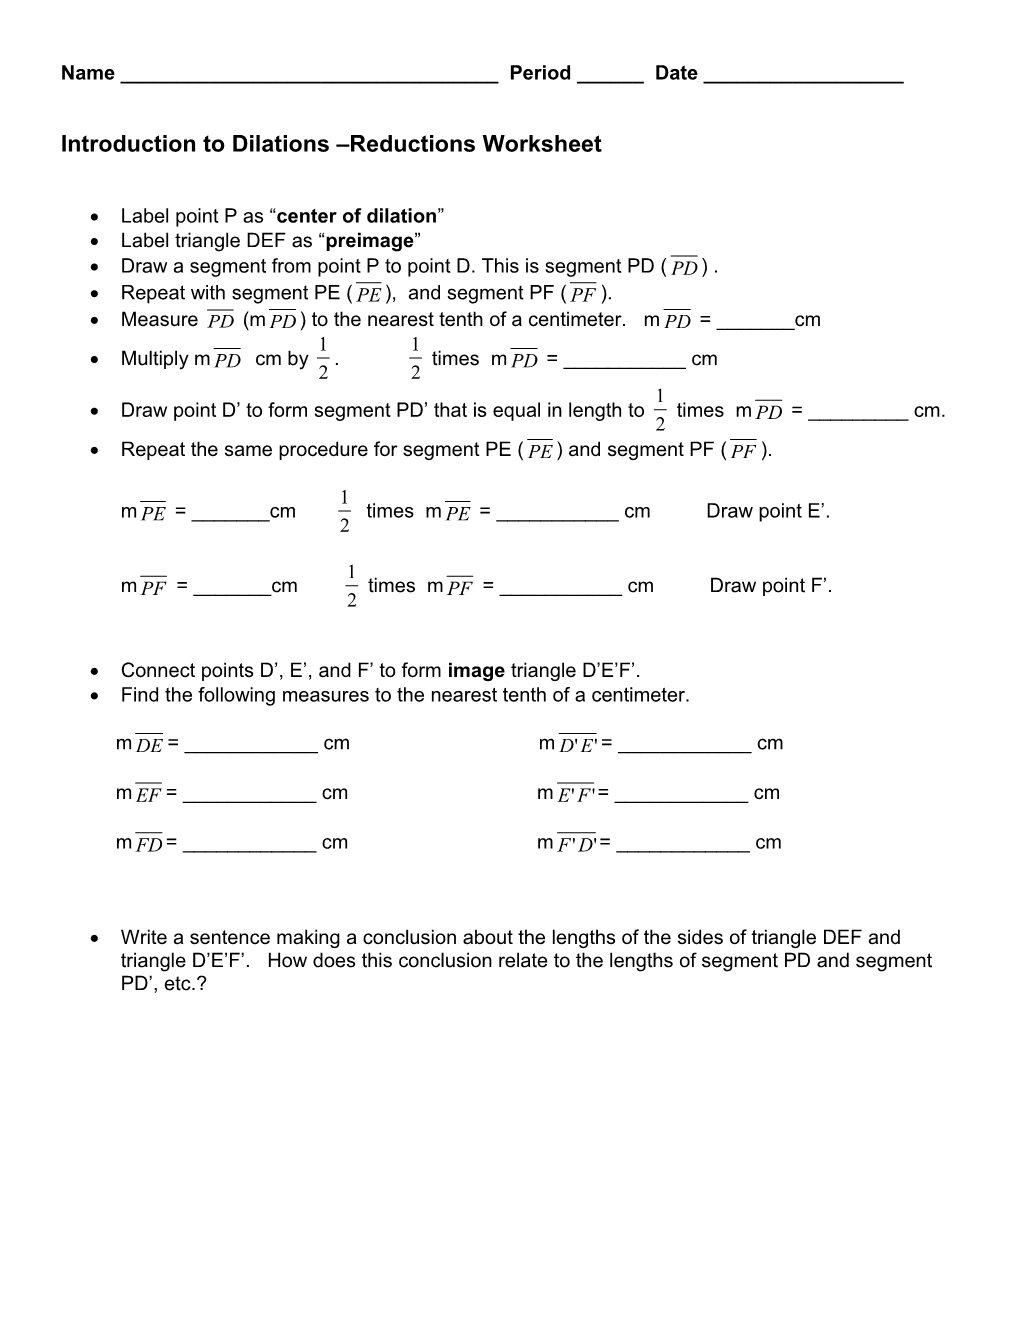 Introduction to Dilations Reductions Worksheet